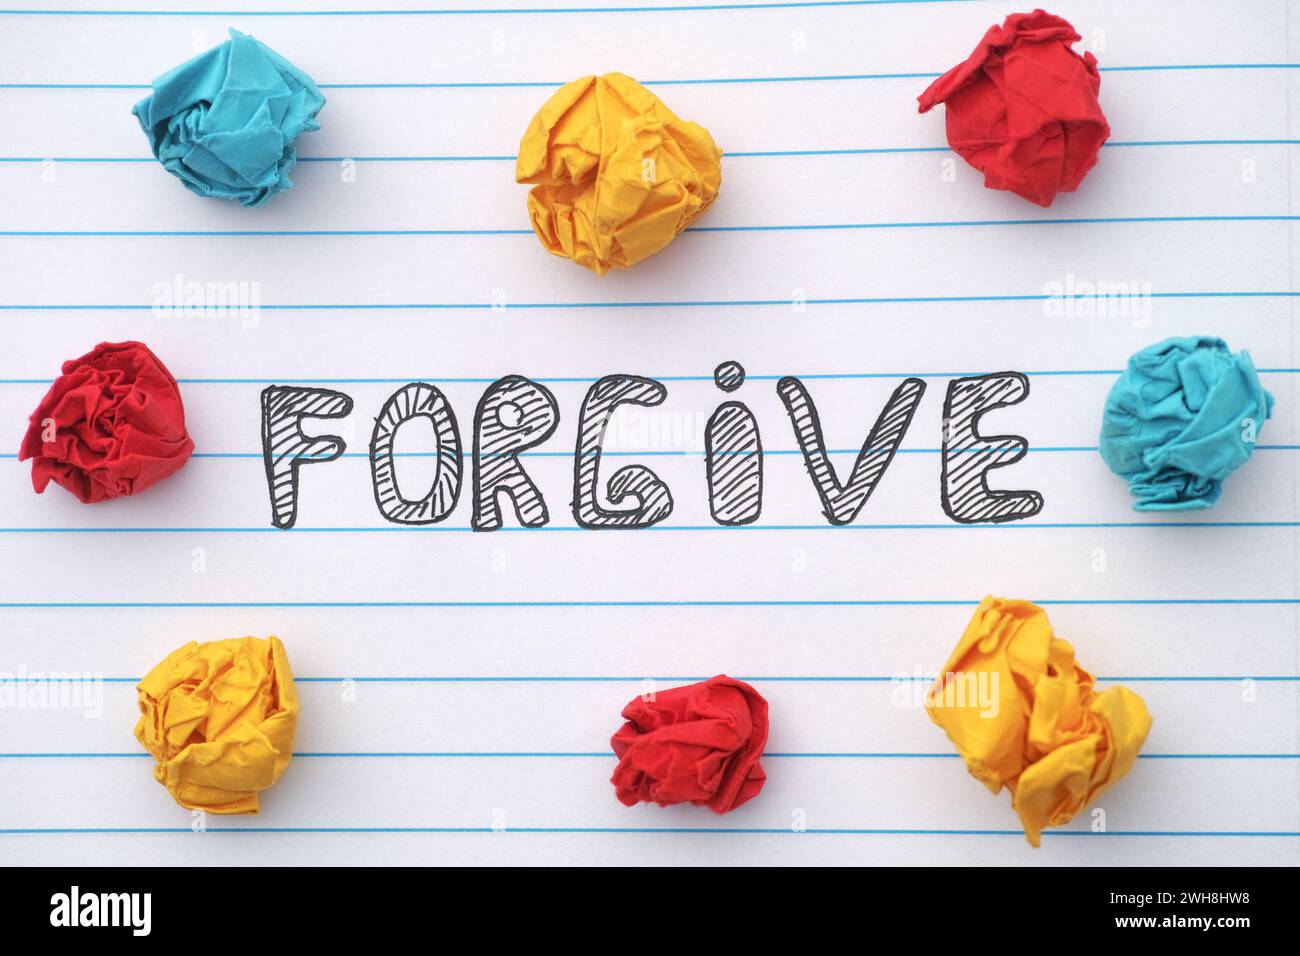 Forgive. The word Forgive written on a notebook sheet with some colorful crumpled paper balls around it. Close up. Stock Photo